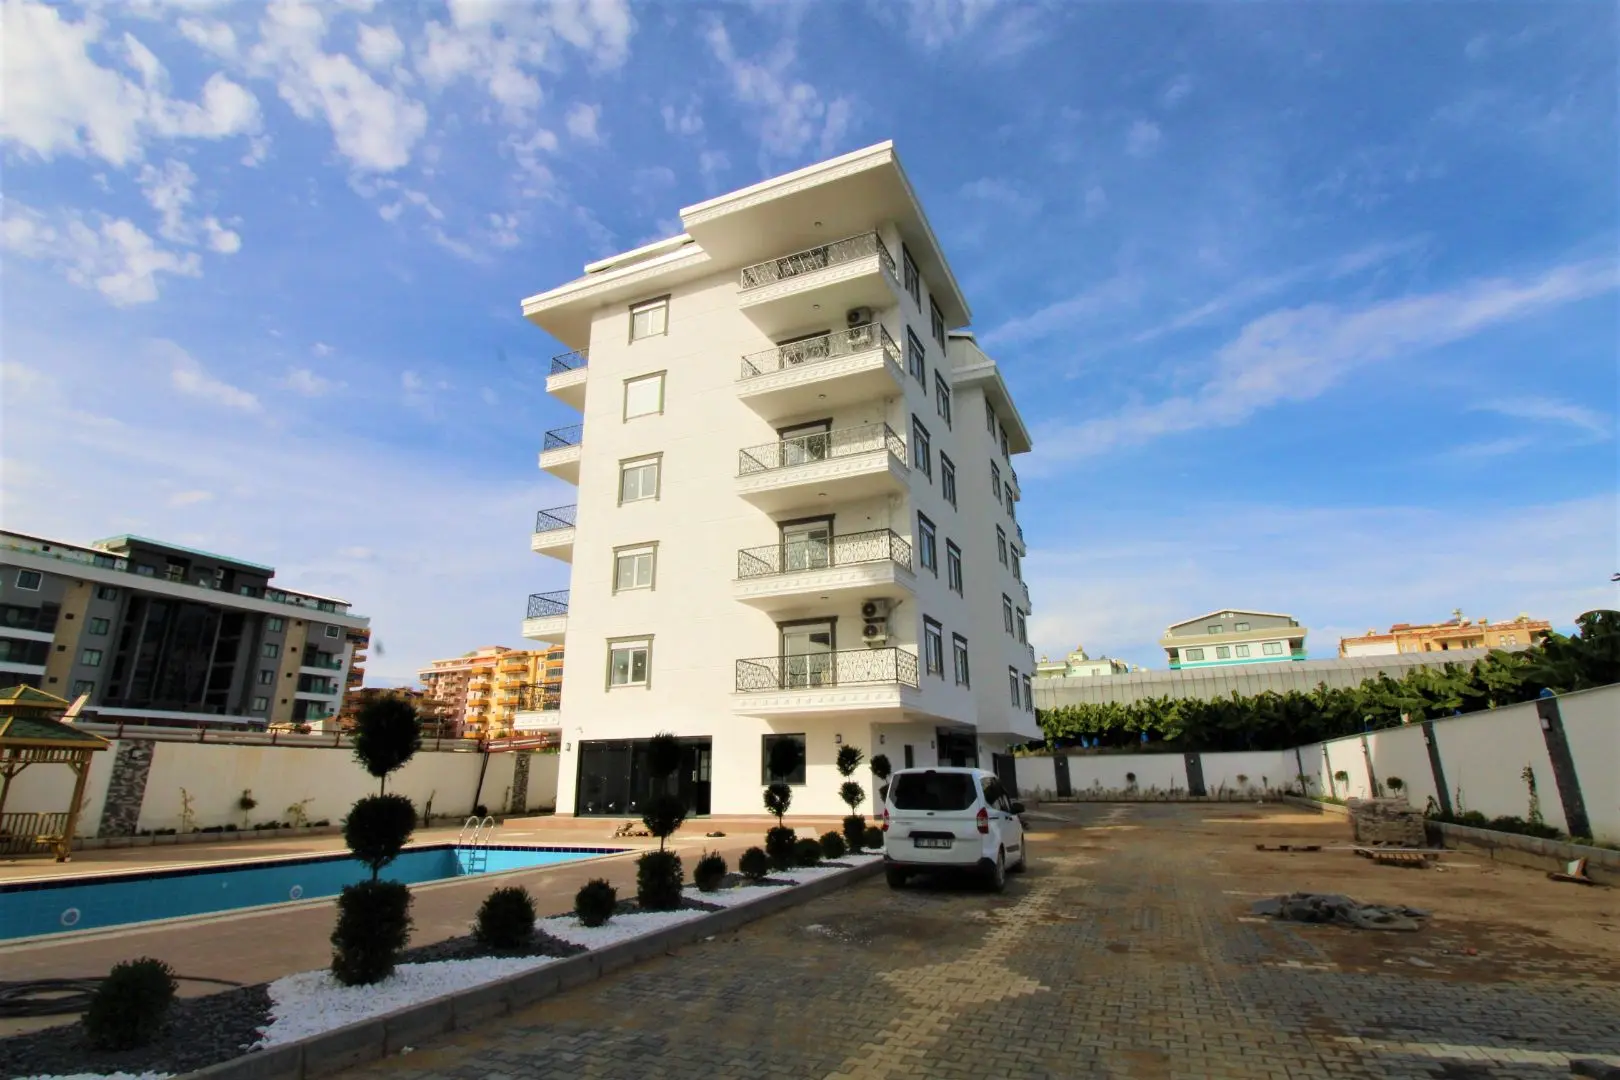 NEW AND FURNISHED 1+1 APARTMENT FOR RENT IN KARGICAK, ALANYA